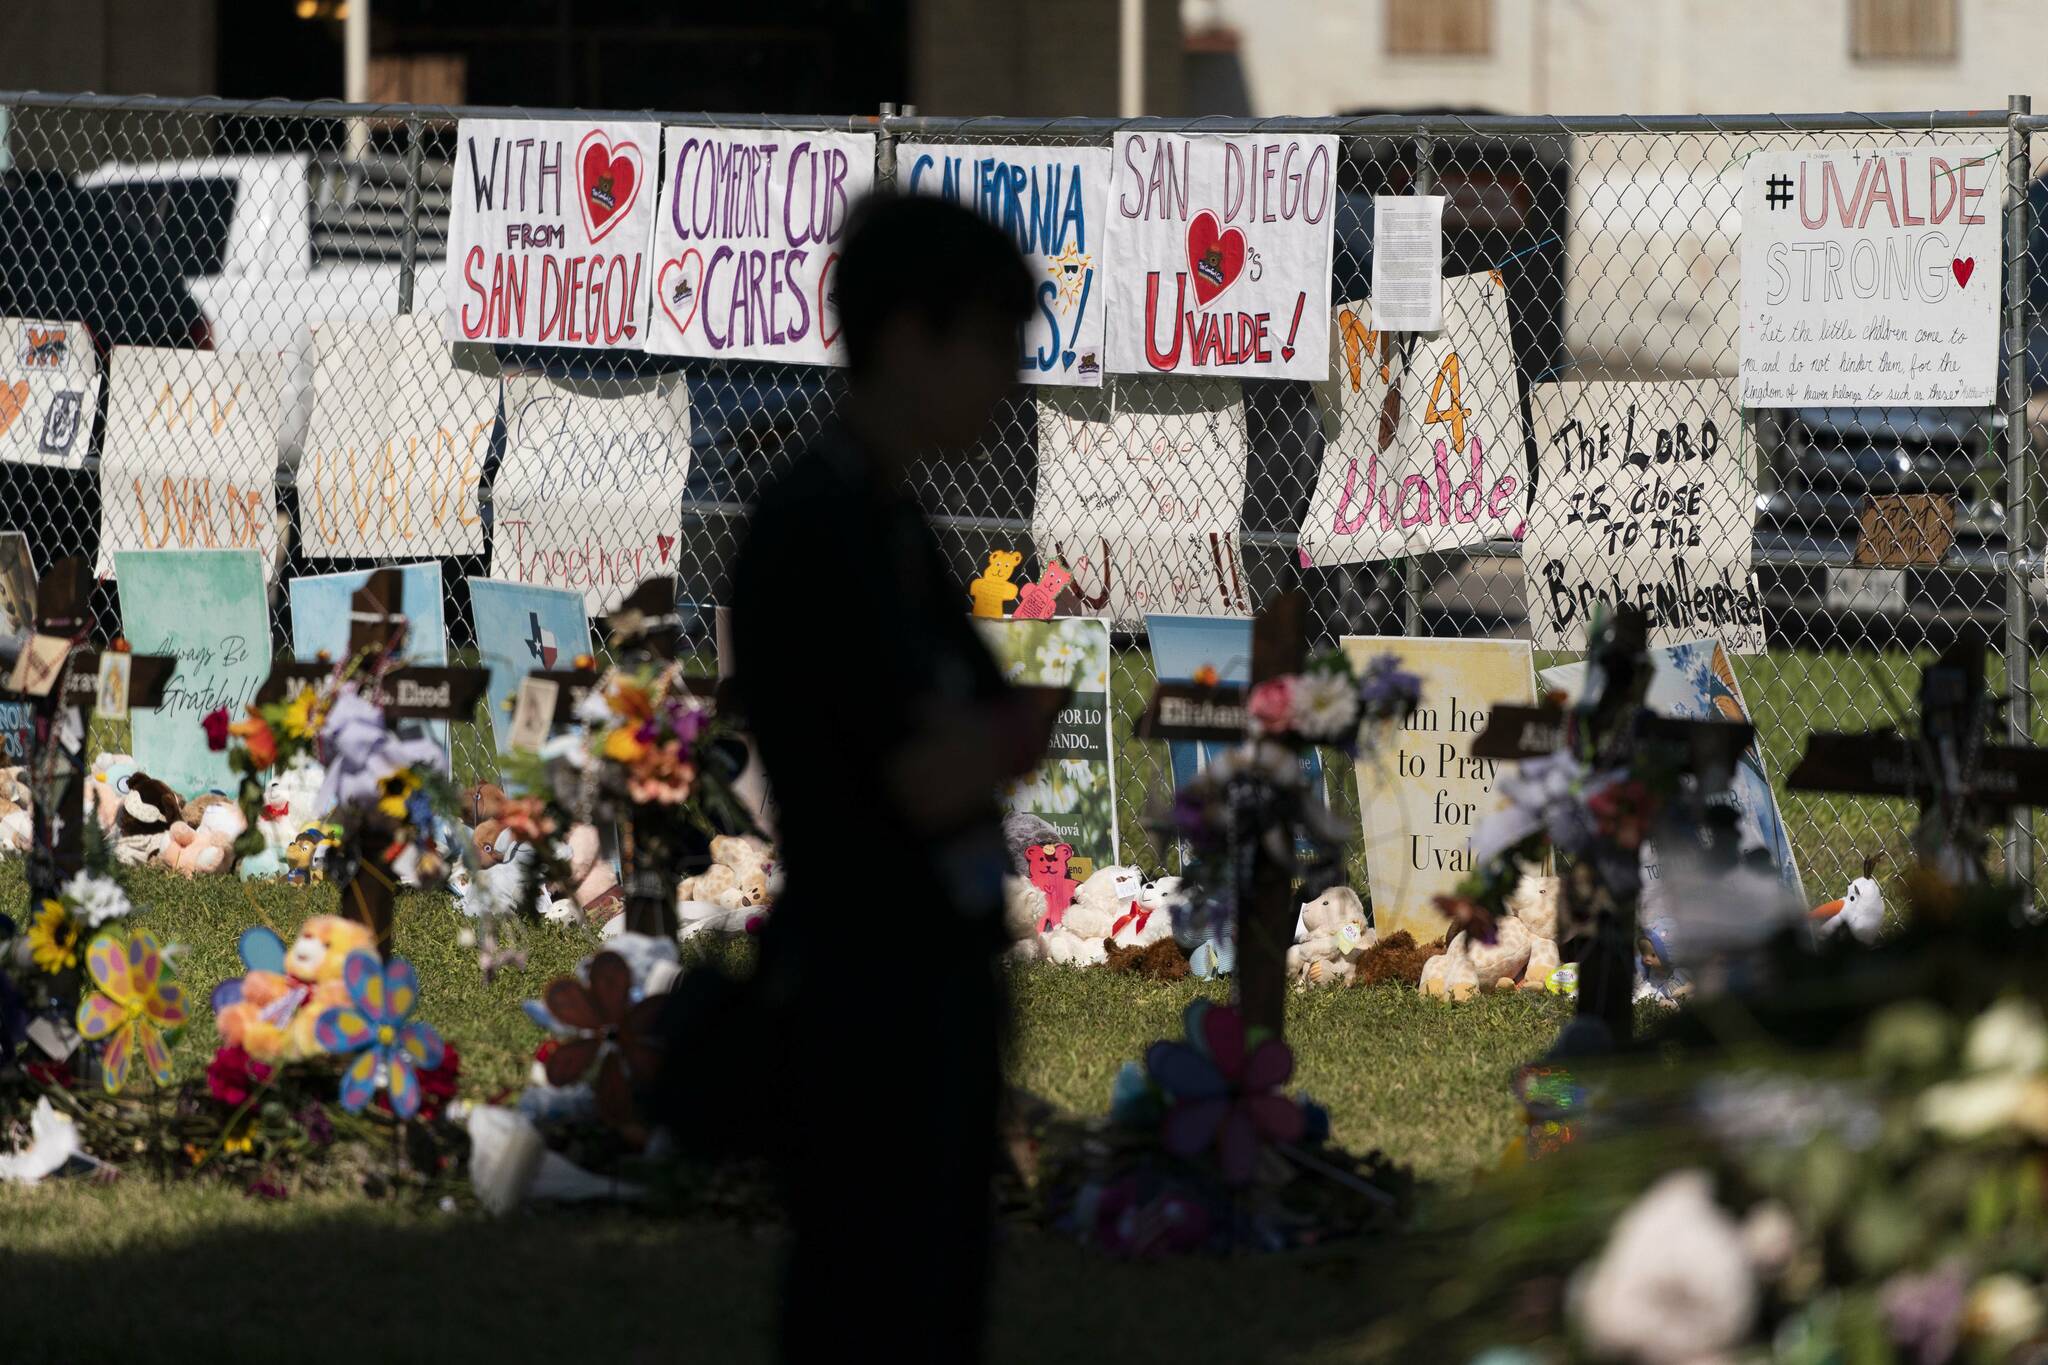 A woman visits a memorial honoring the victims killed in last week’s elementary school shooting in Uvalde, Texas, Friday, June 3, 2022. It’s hard to say exactly when some Texas educators began to feel like they were under siege, but the massacre of 19 students and two teachers at Robb Elementary School is only the latest, horrific episode in a string of events dating back years. (AP Photo/Jae C. Hong)